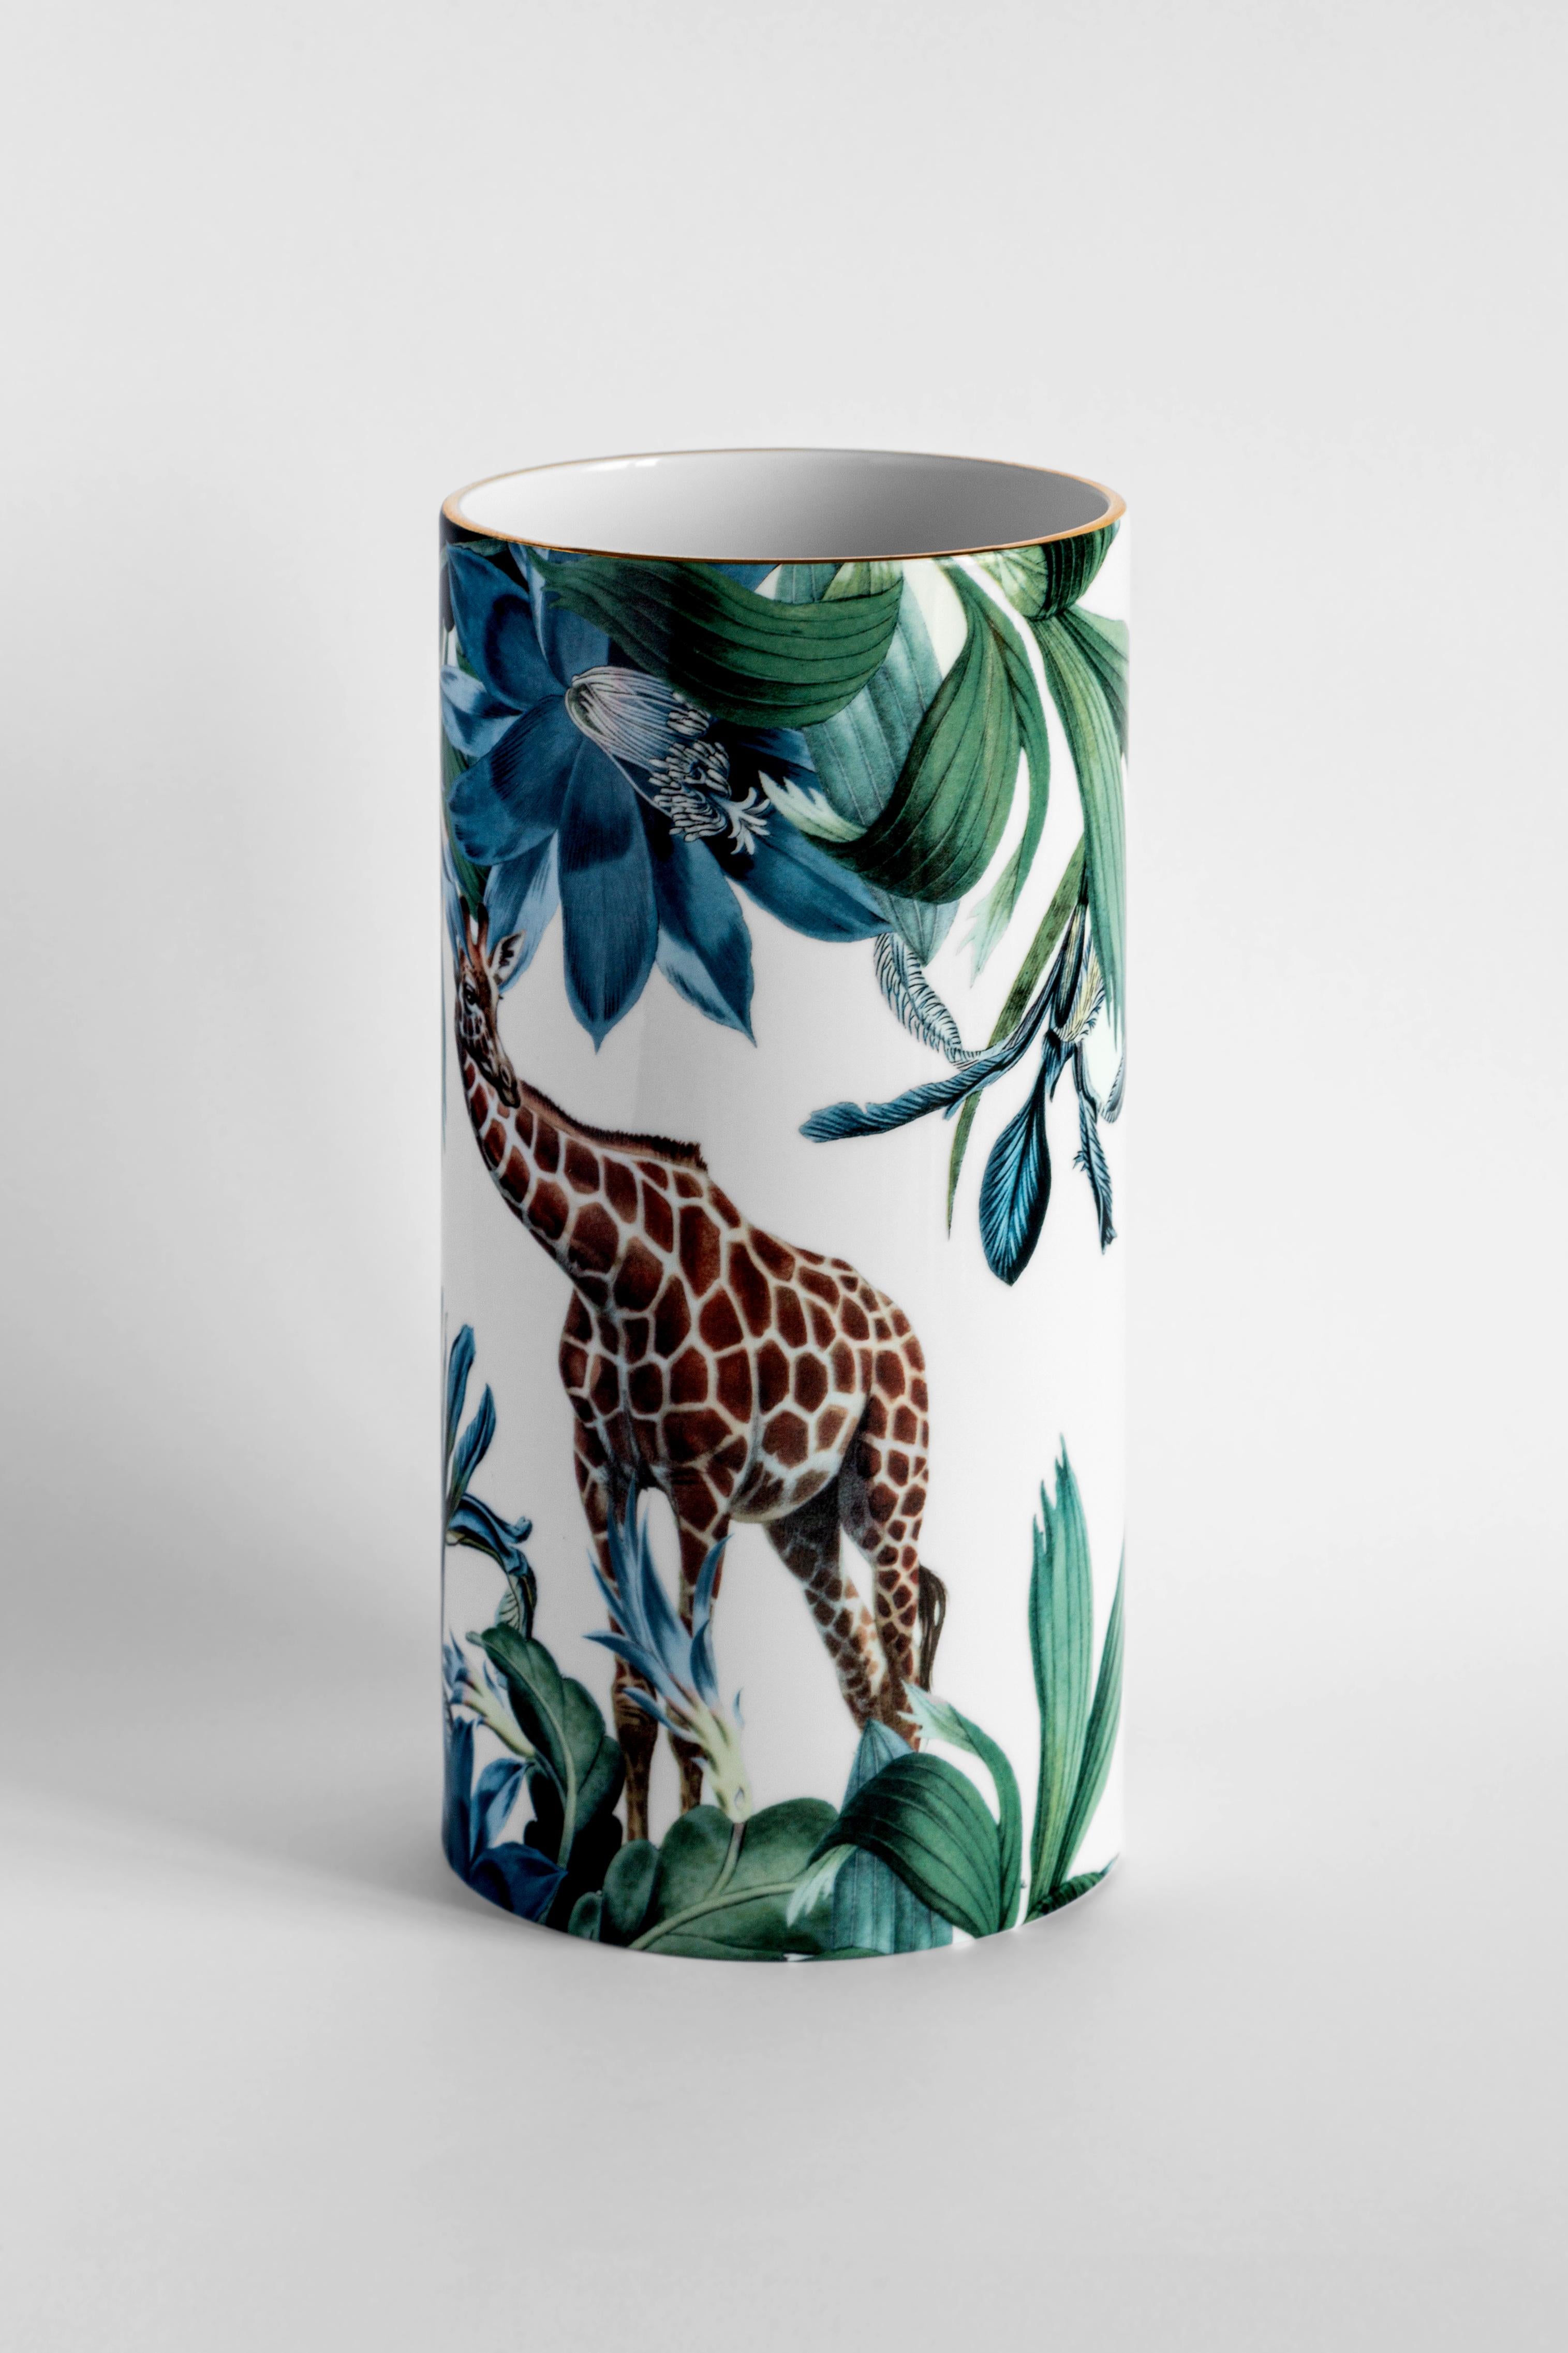 Showcasing a stunning African giraffa, this Vase is part of Vito Nesta's Animalia tribute in his signature Grand Tour Collection. Combining burnt orange, luscious greens, and blues, the rich details of the animal and plants create an extraordinary